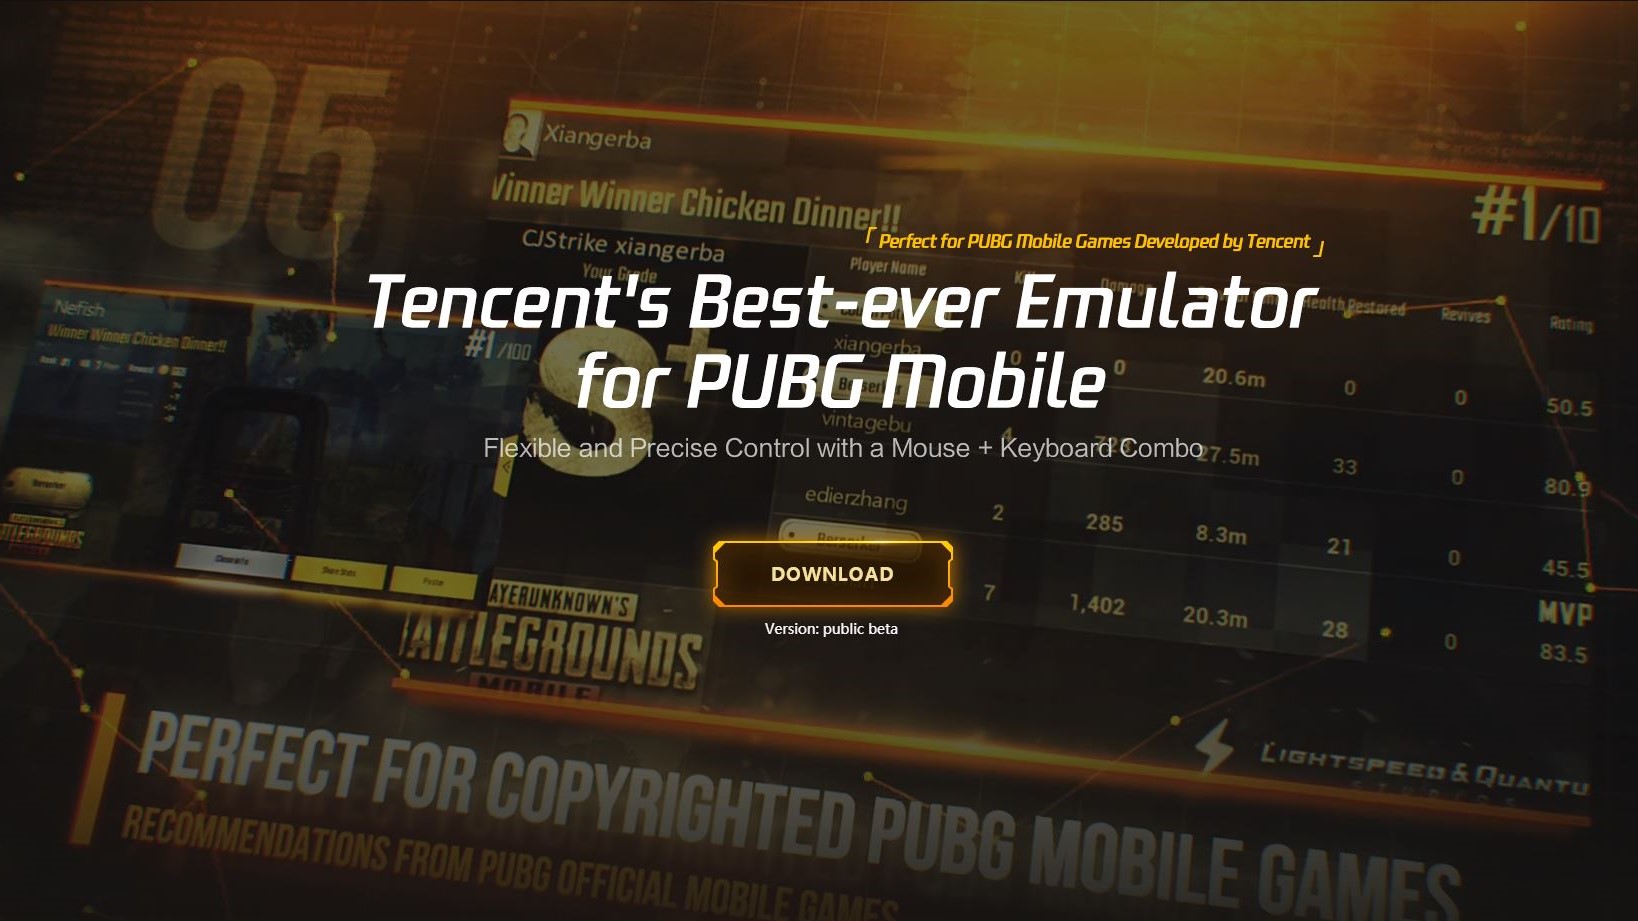 Tencent gaming buddy PUBG mobile website